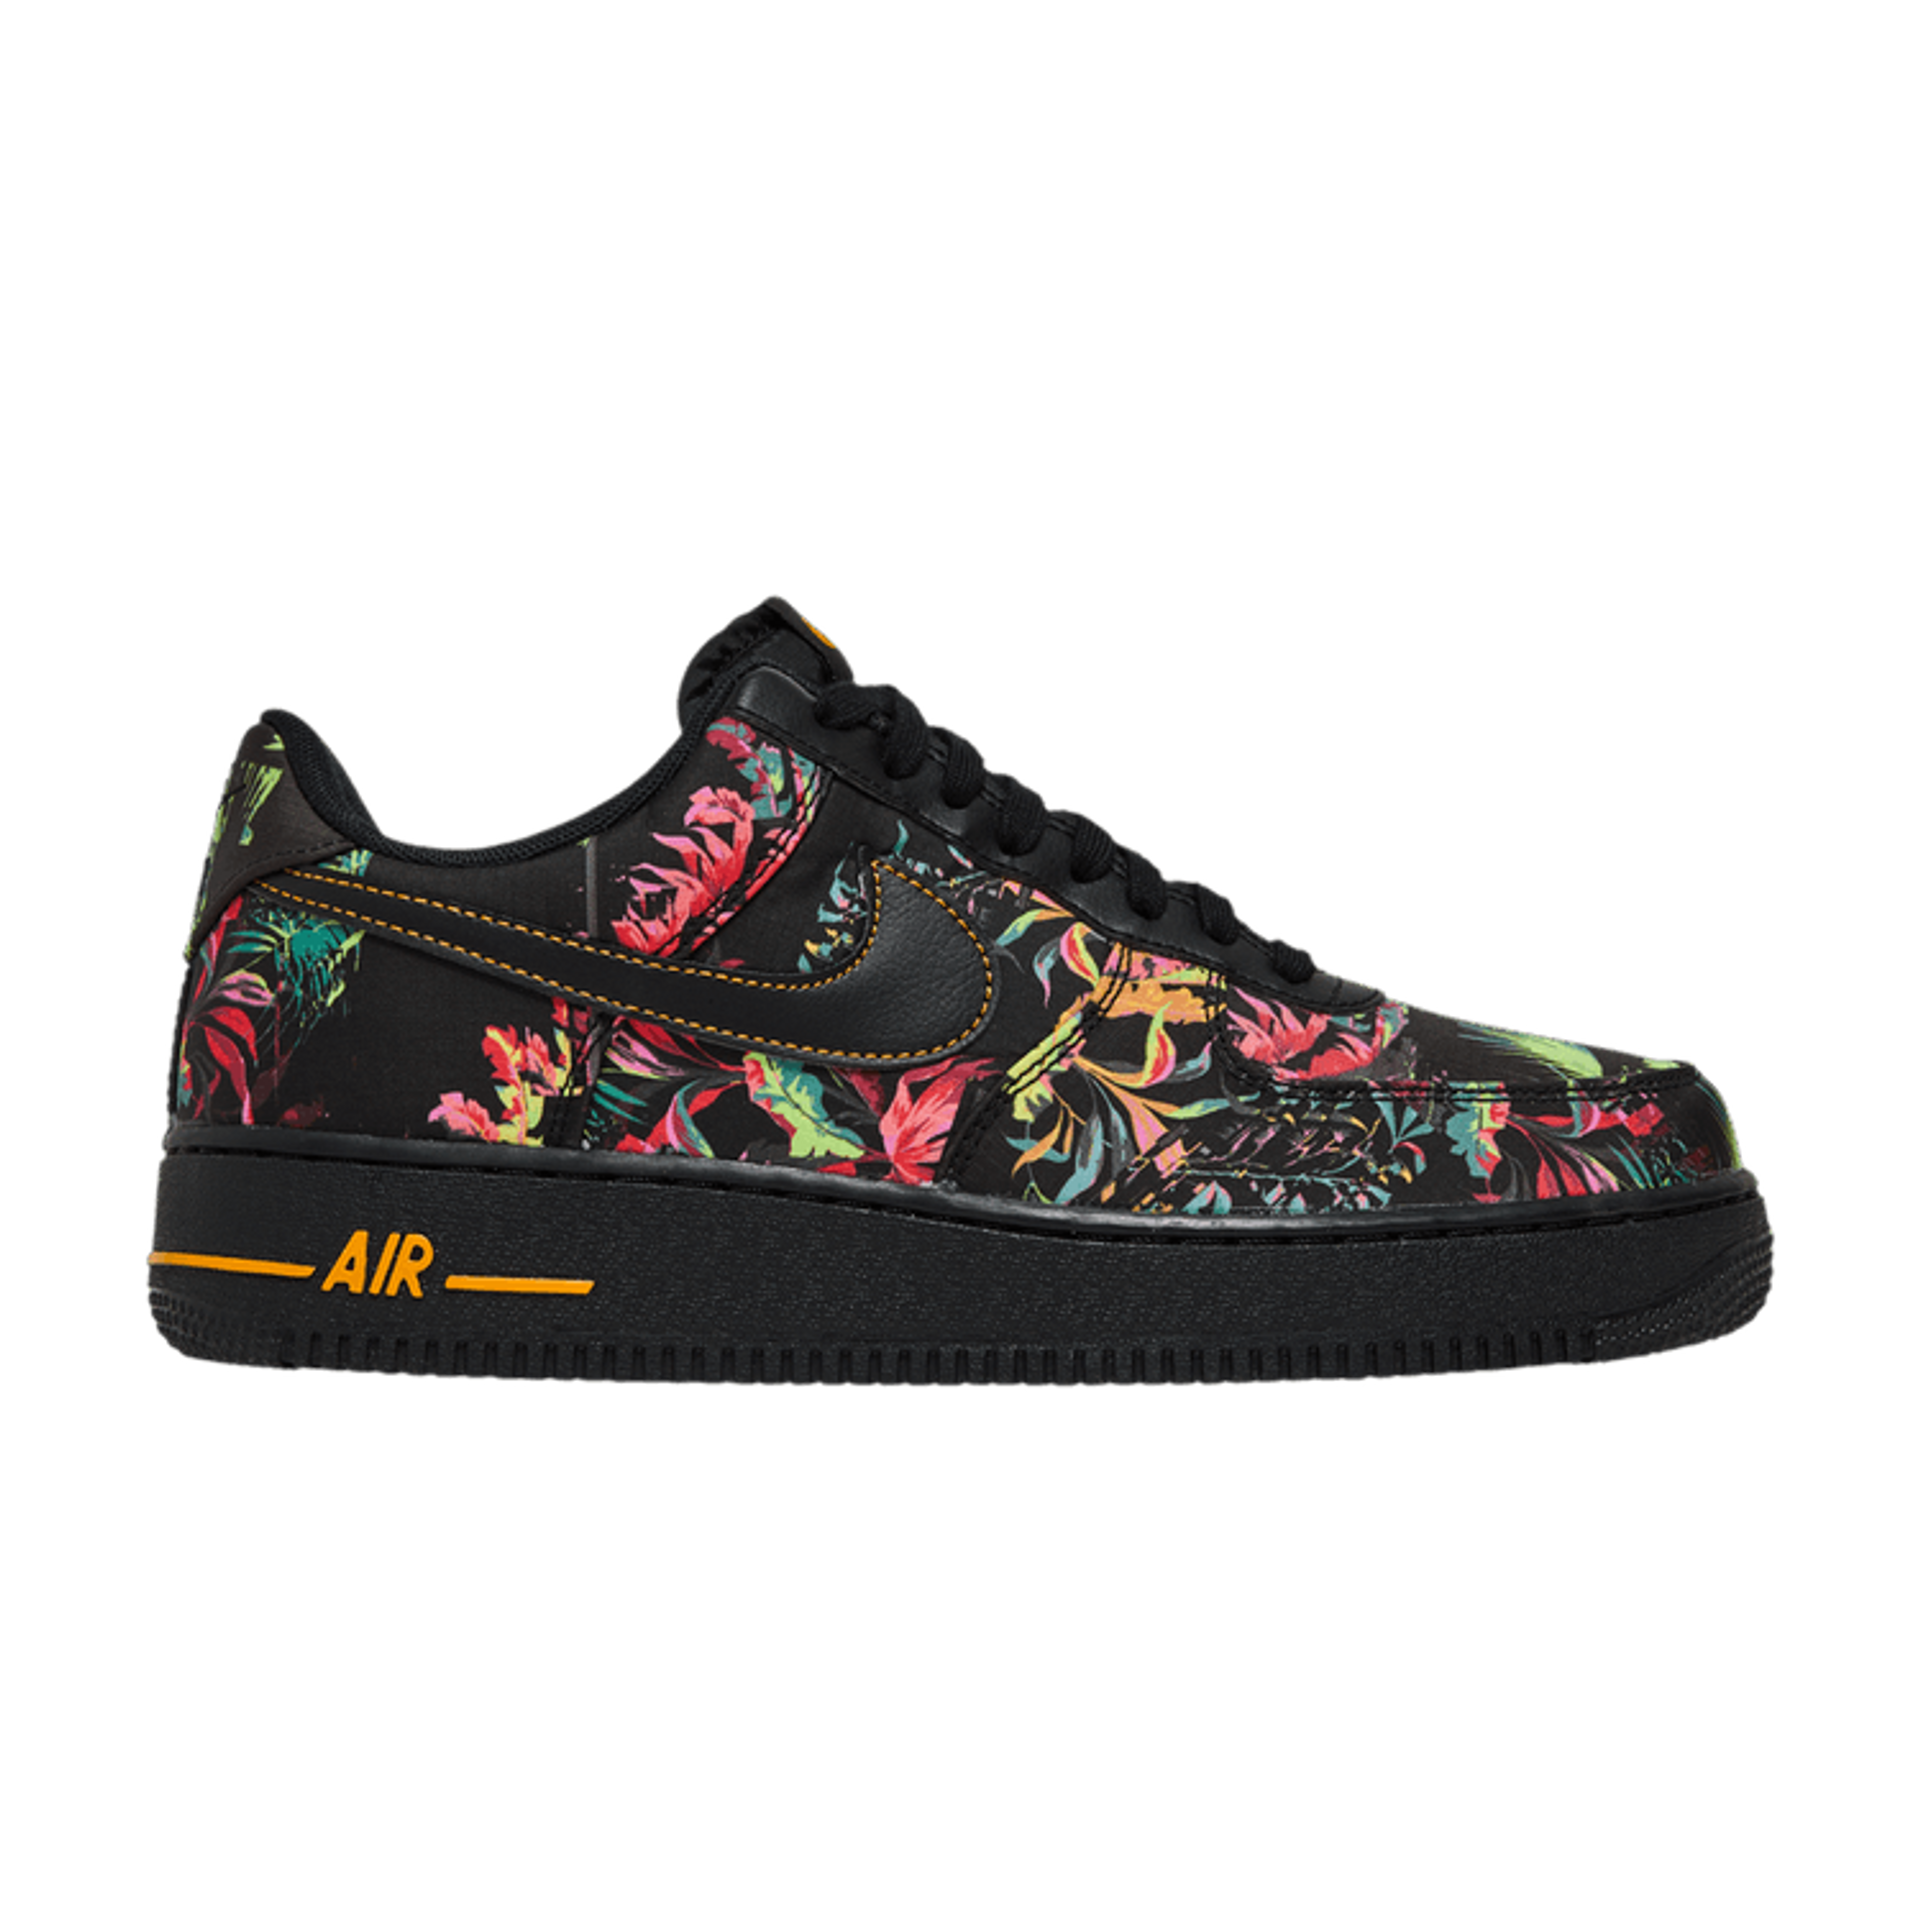 Nike Air Force 1 '07 LV8 'Floral Pack'